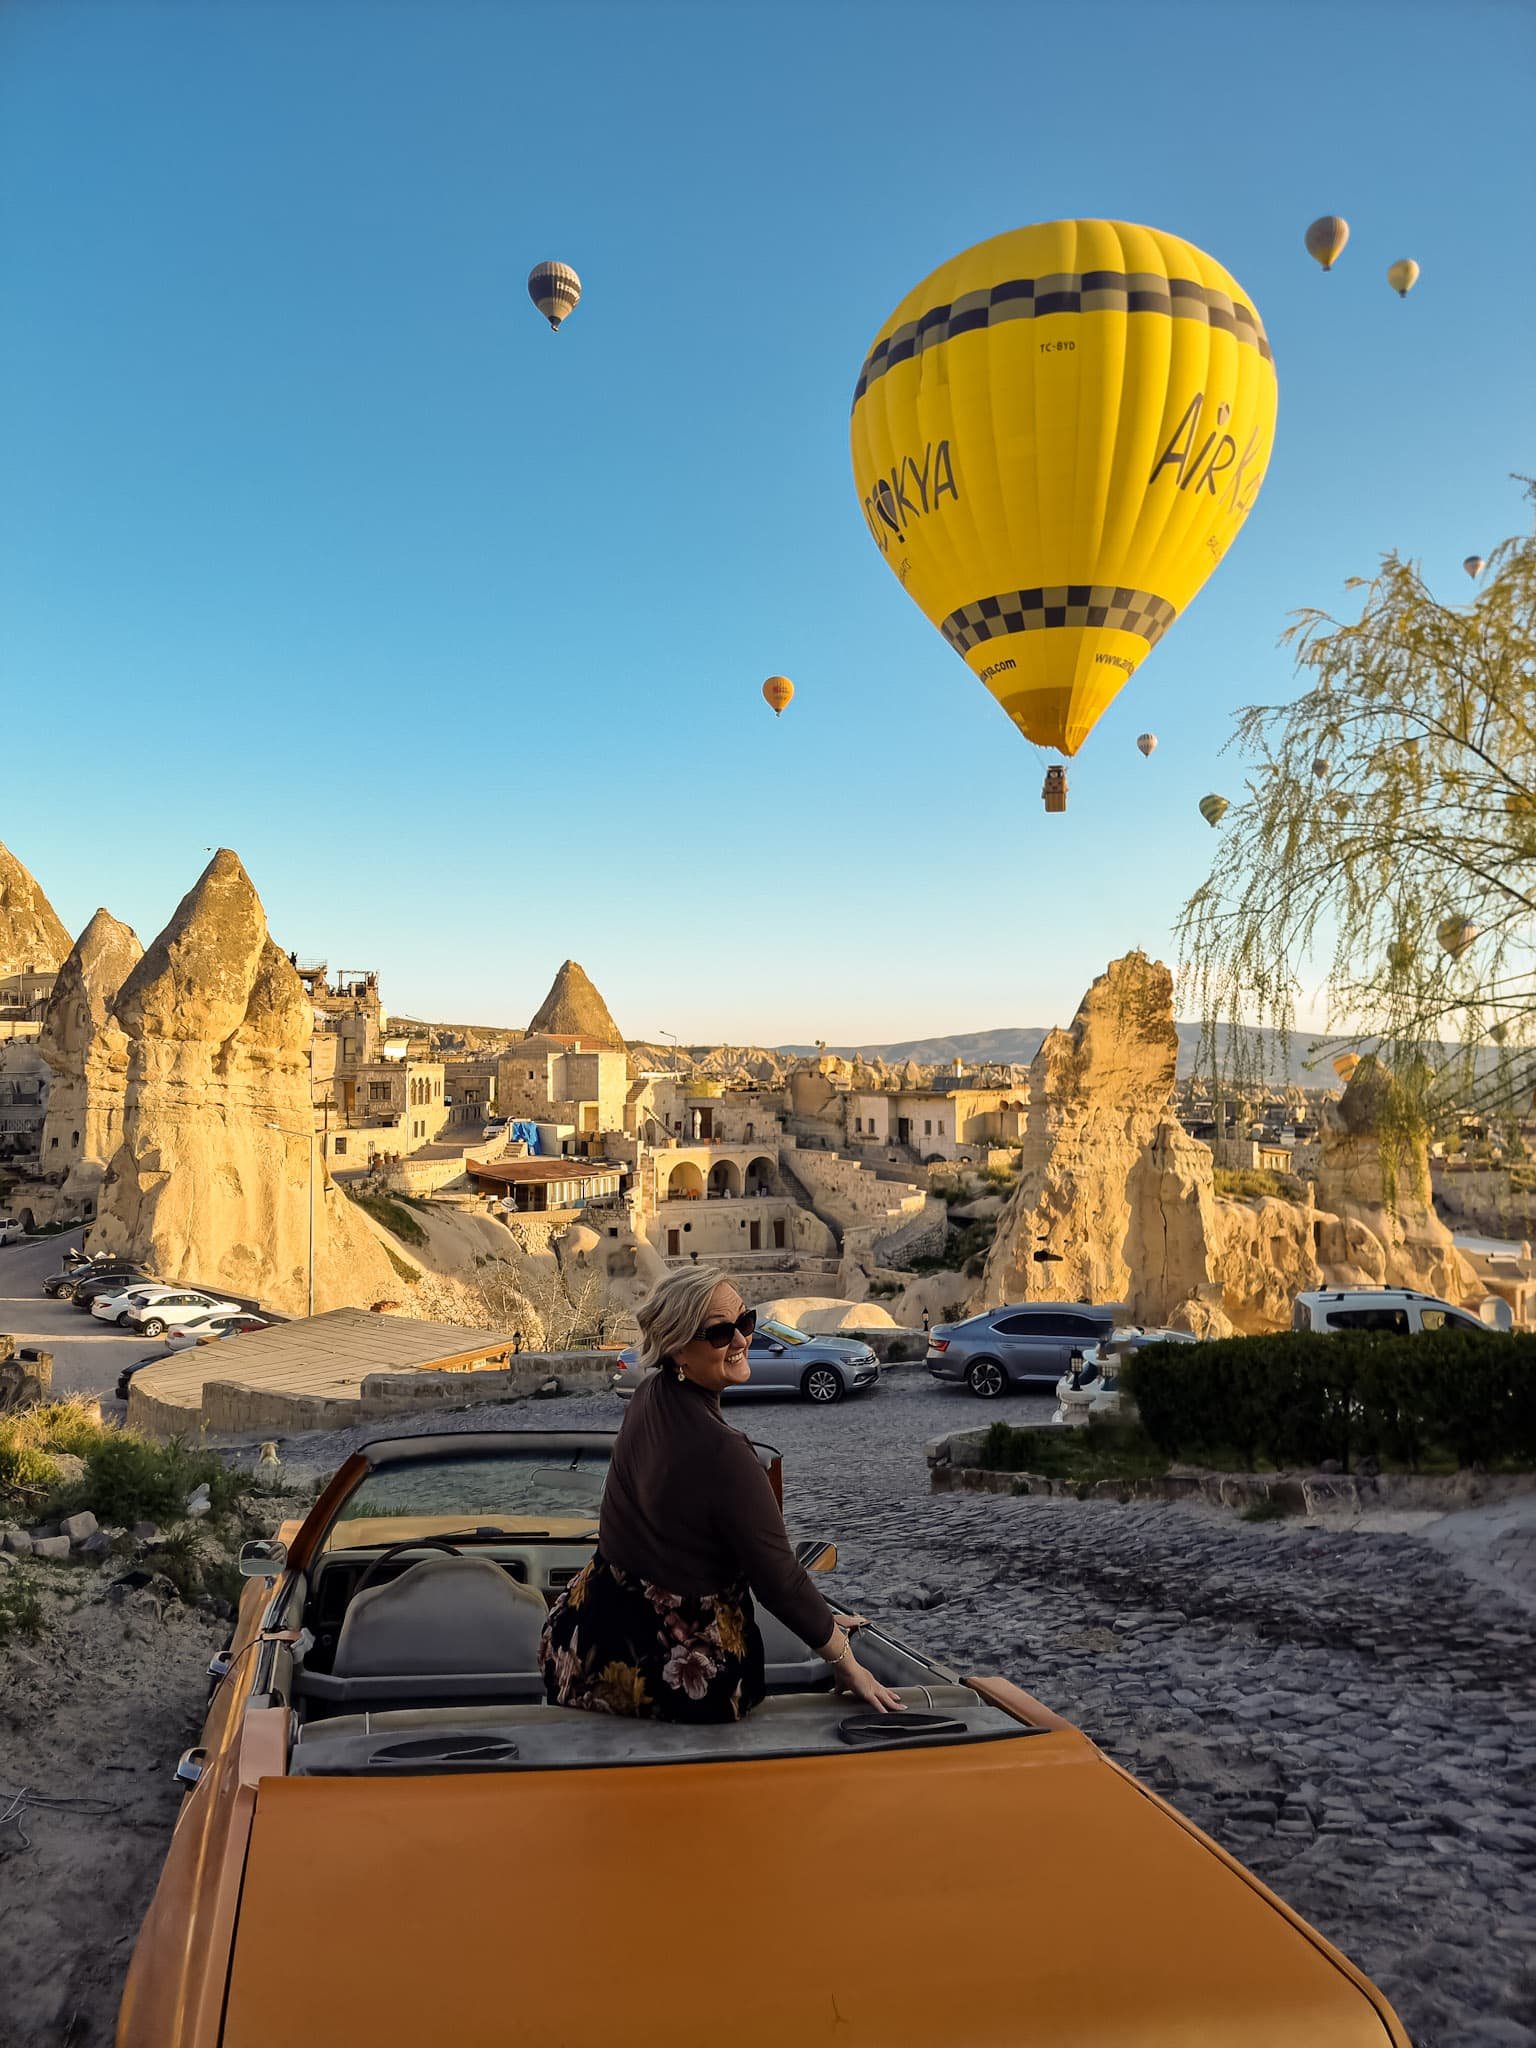 SJ sitting on a yellow vintage car watching hot air balloons fly over rocky landscape after 3 days in Cappadocia, Turkey.